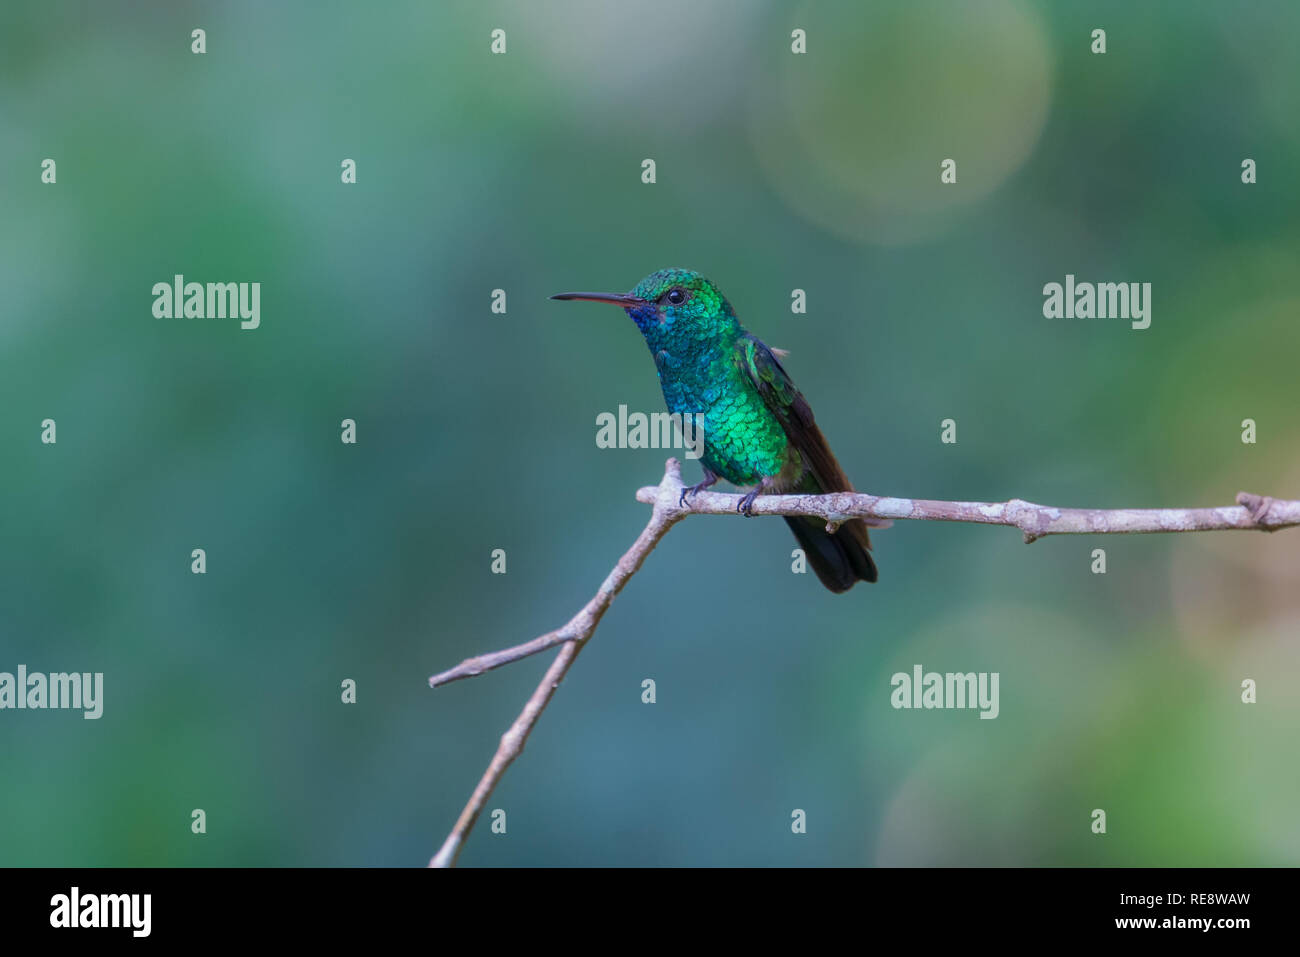 Blue-chinned Sapphire hummingbird perched on a branch with blurry background Stock Photo